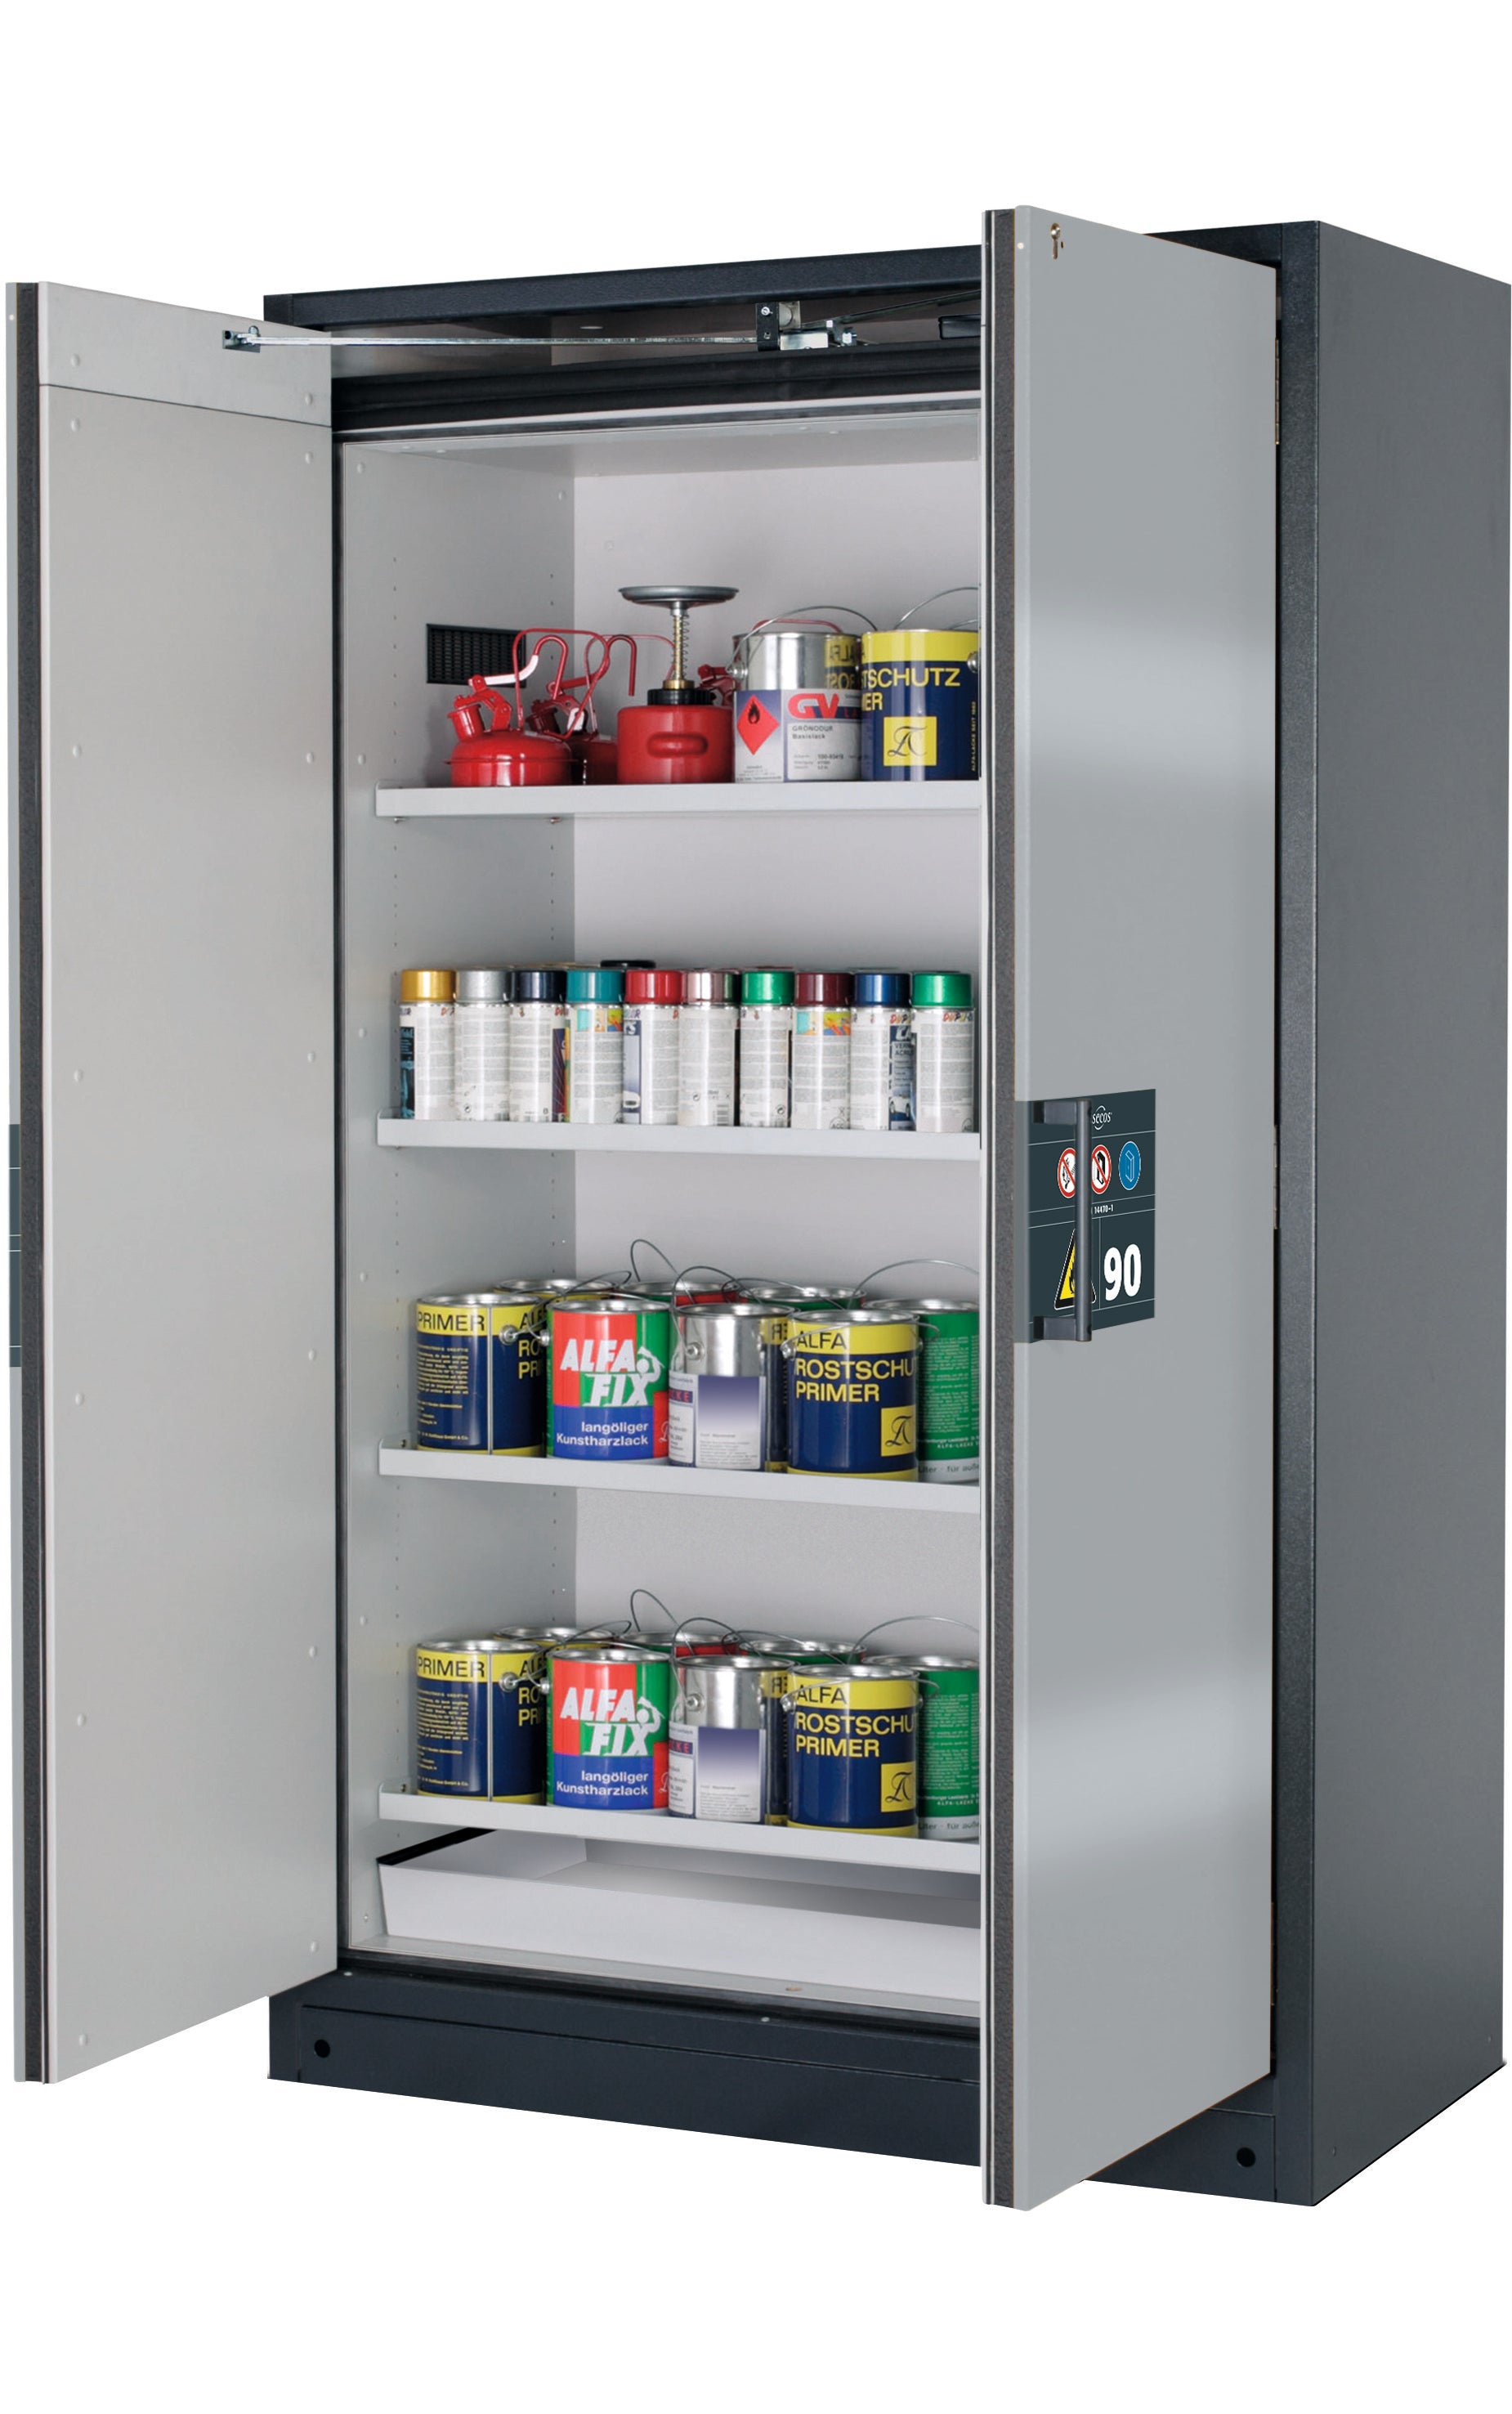 Type 90 safety storage cabinet Q-PEGASUS-90 model Q90.195.120.WDAC in asecos silver with 4x shelf standard (sheet steel),